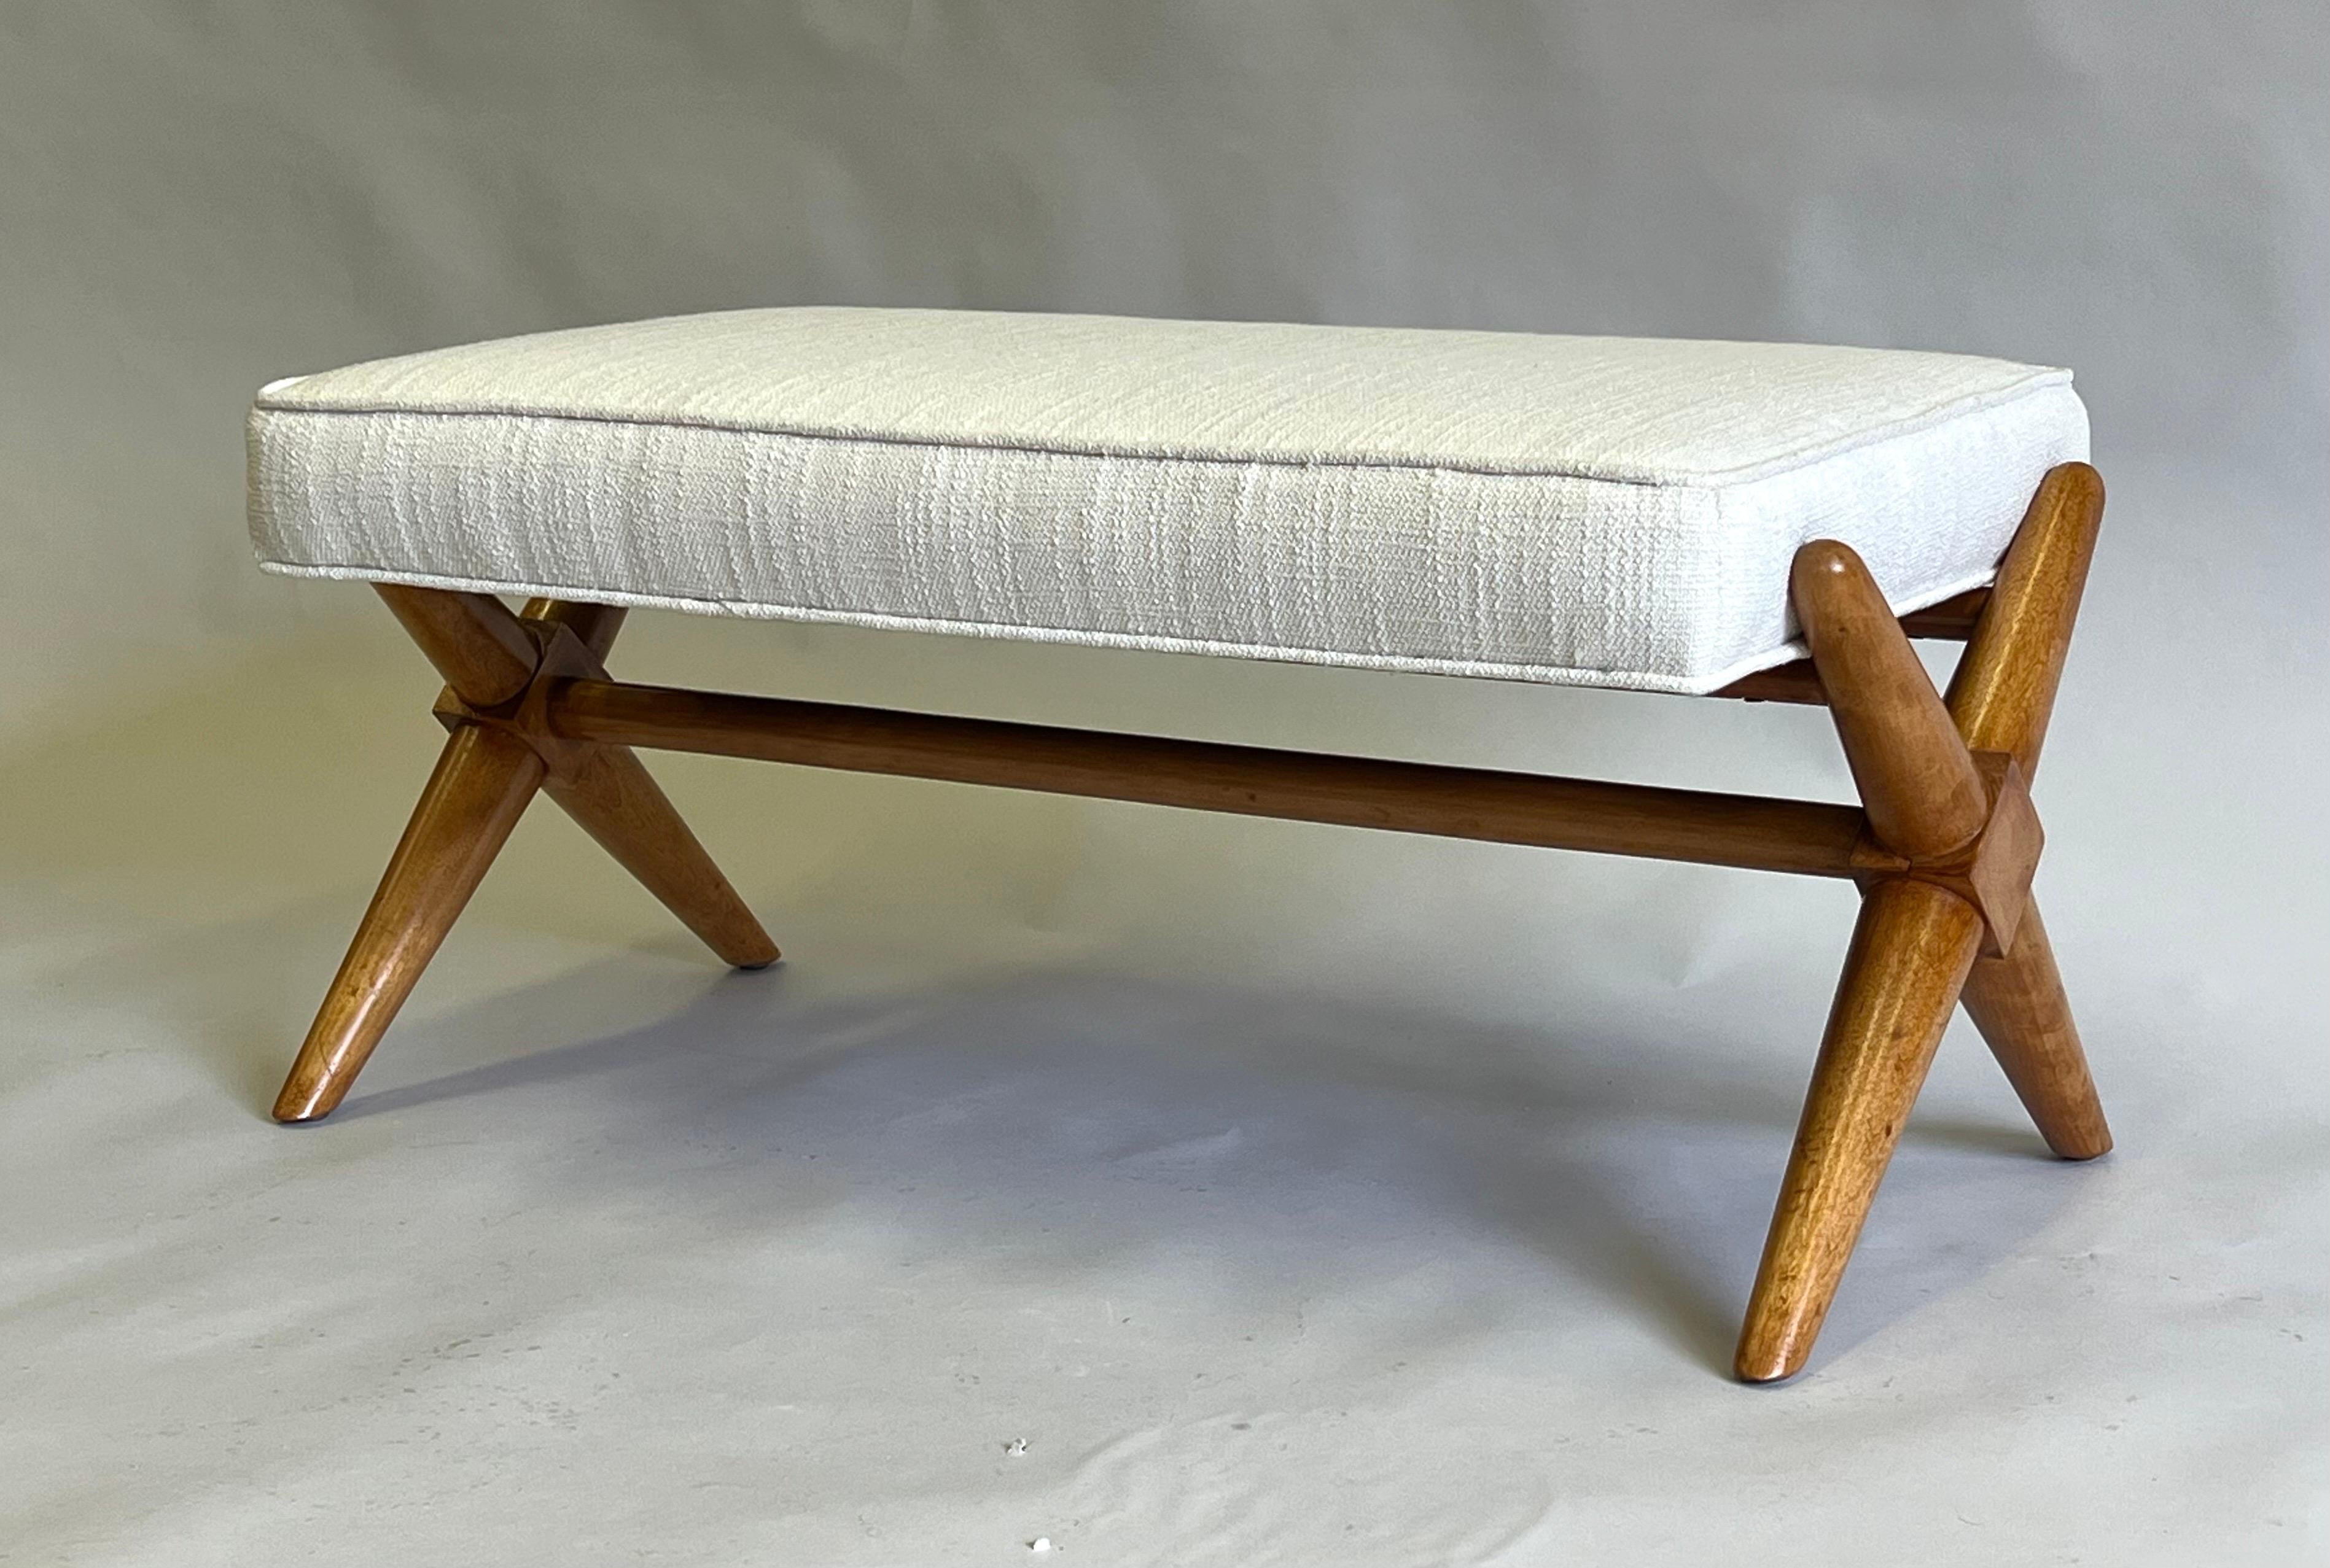 Hand-Carved Mid-Century Modern Neoclassical Hardwood Bench in the style of Jean-Michel Frank For Sale